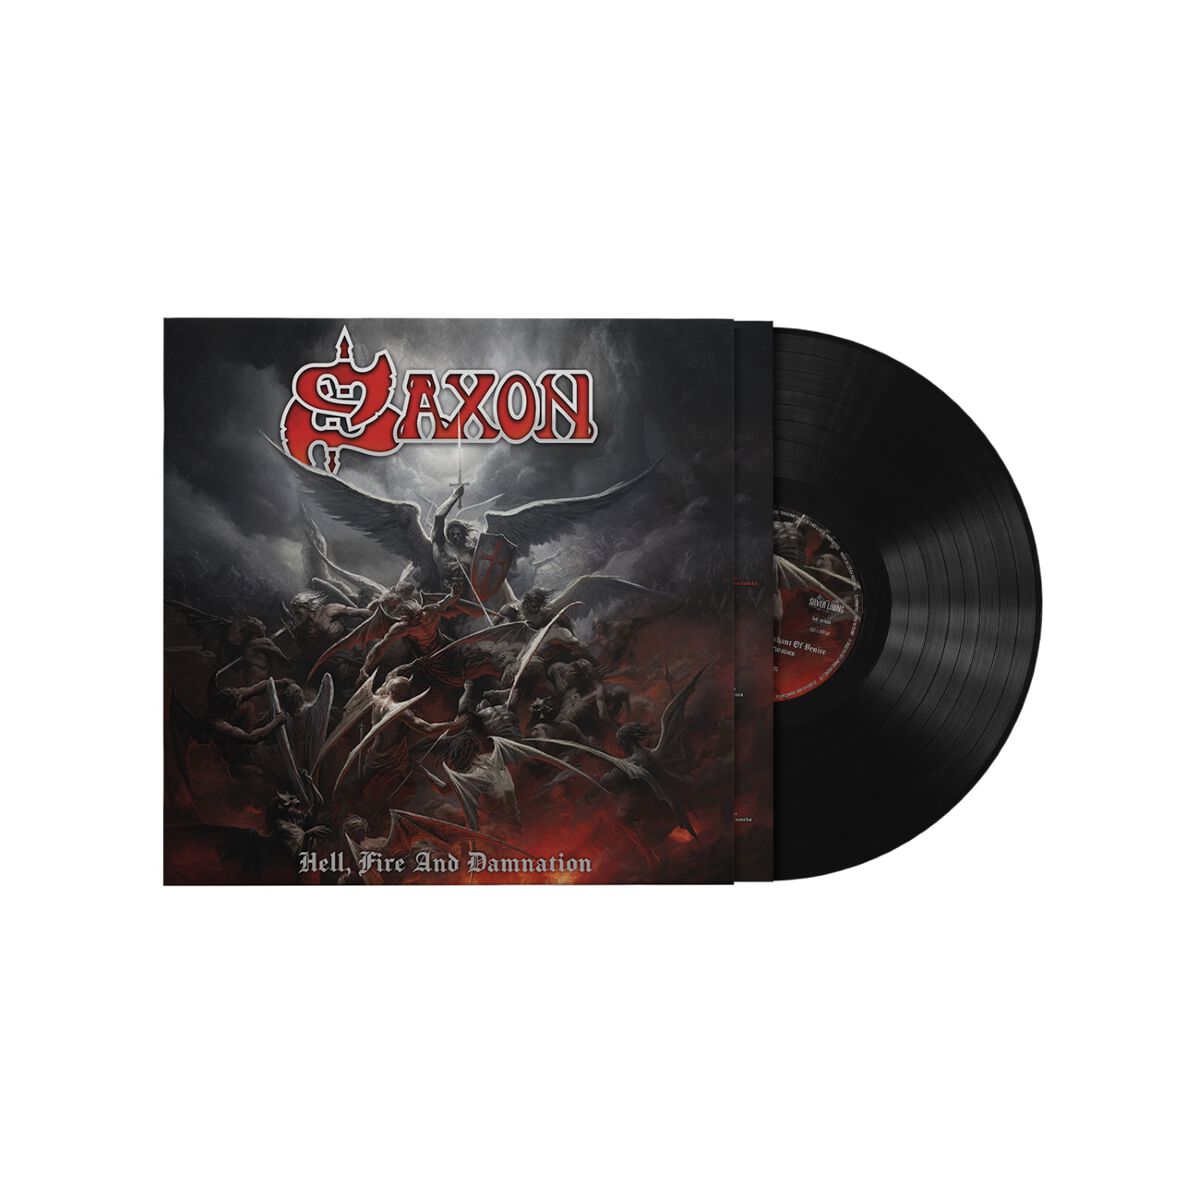 Saxon Hell, fire and damnation LP multicolor